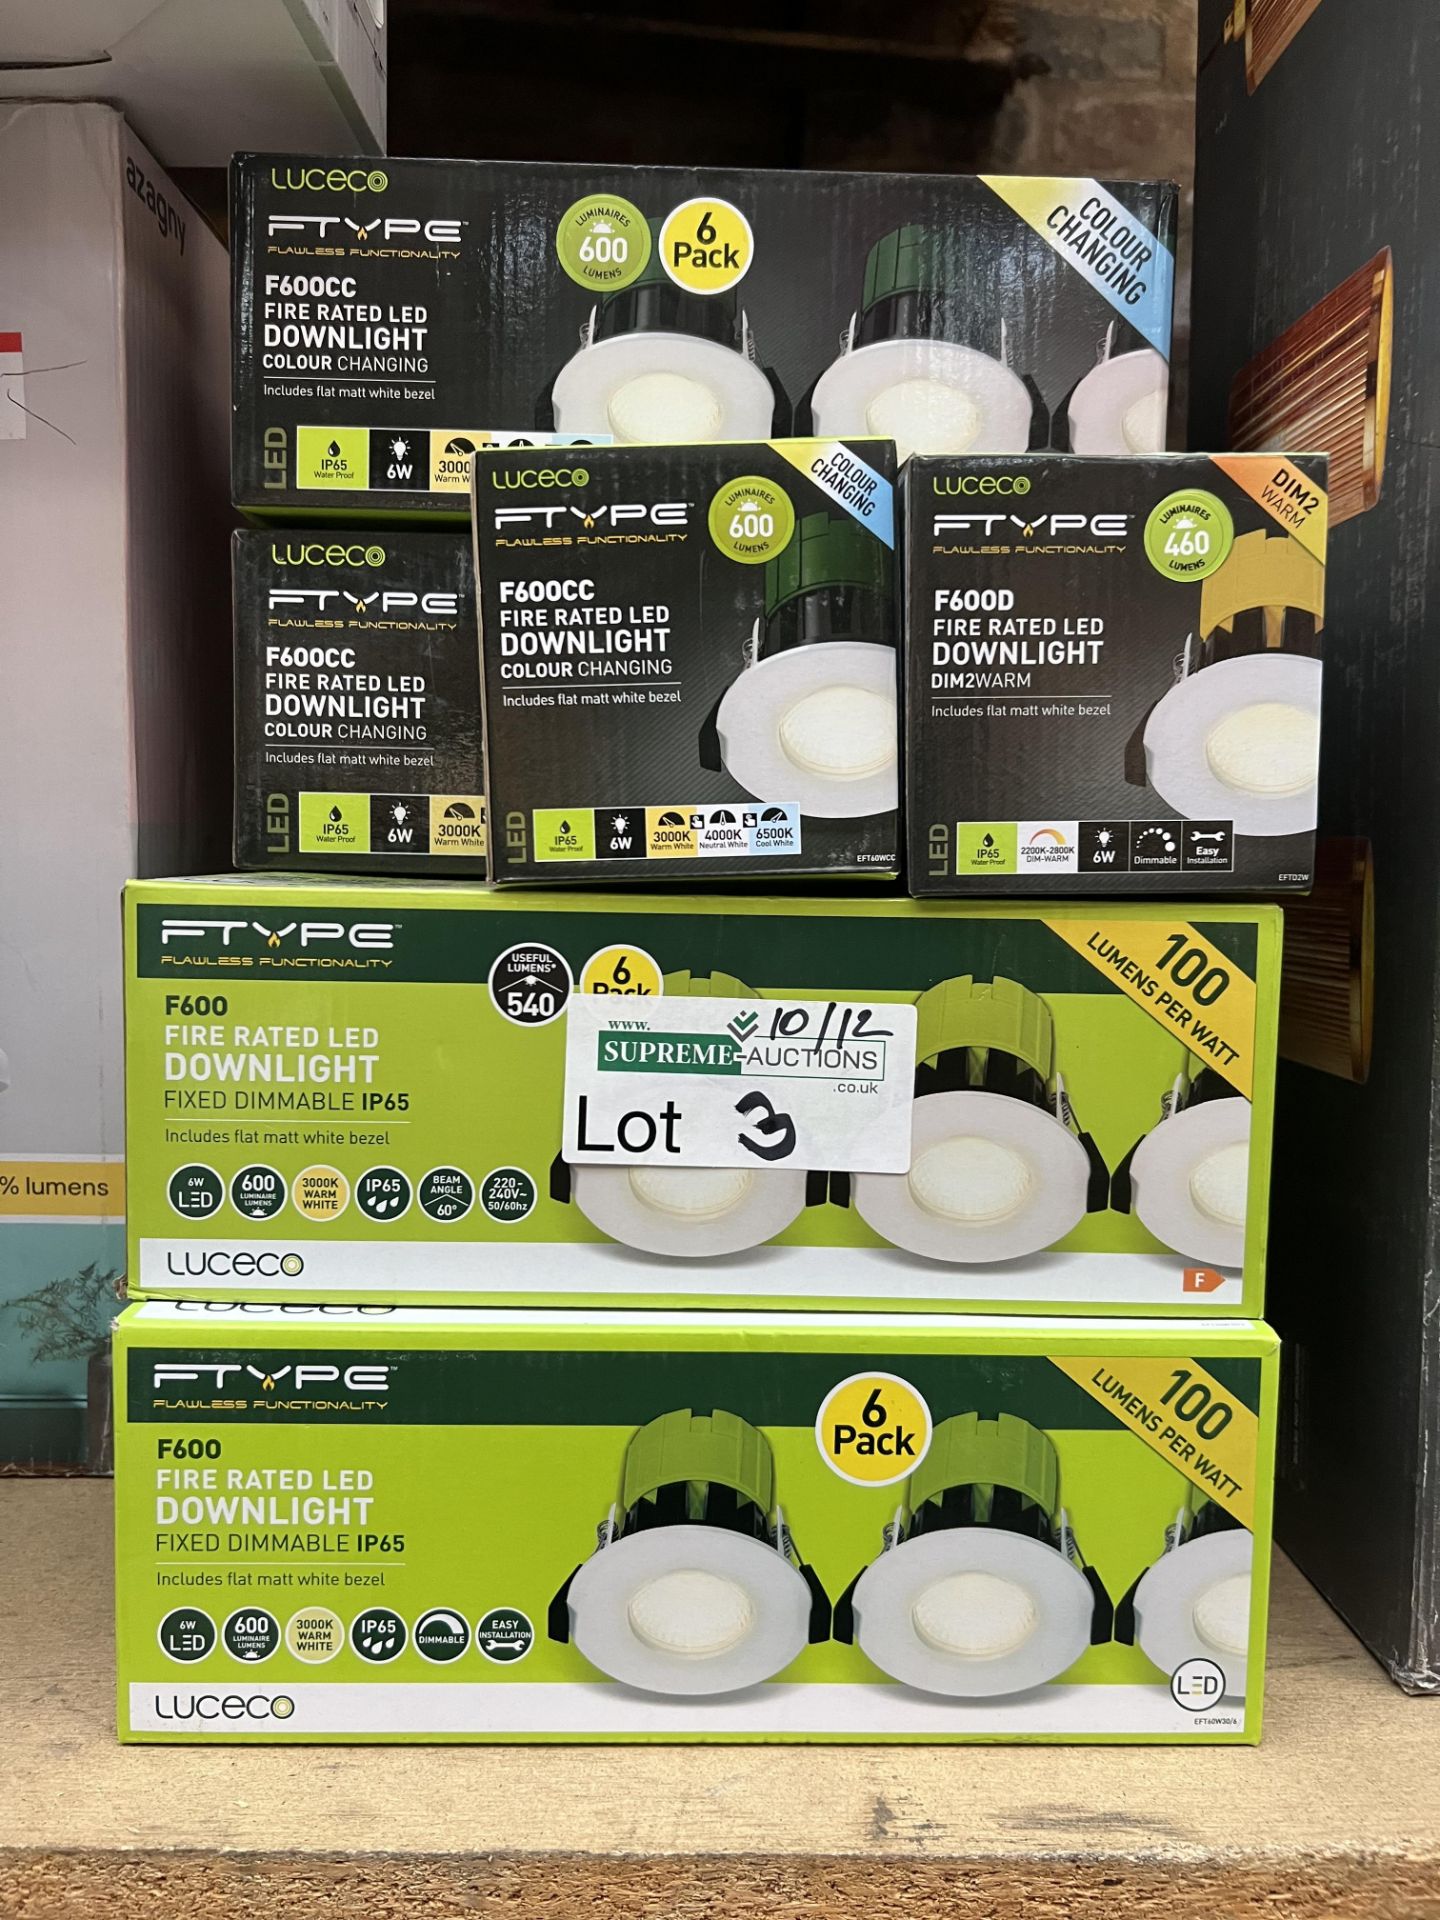 MIXED LOT TO INCLUDE 4 X LUCECO WHITE FIRE RATED LED DOWNLIGHT 6 PACK, 2 X LUCECO WHITE COLOUR